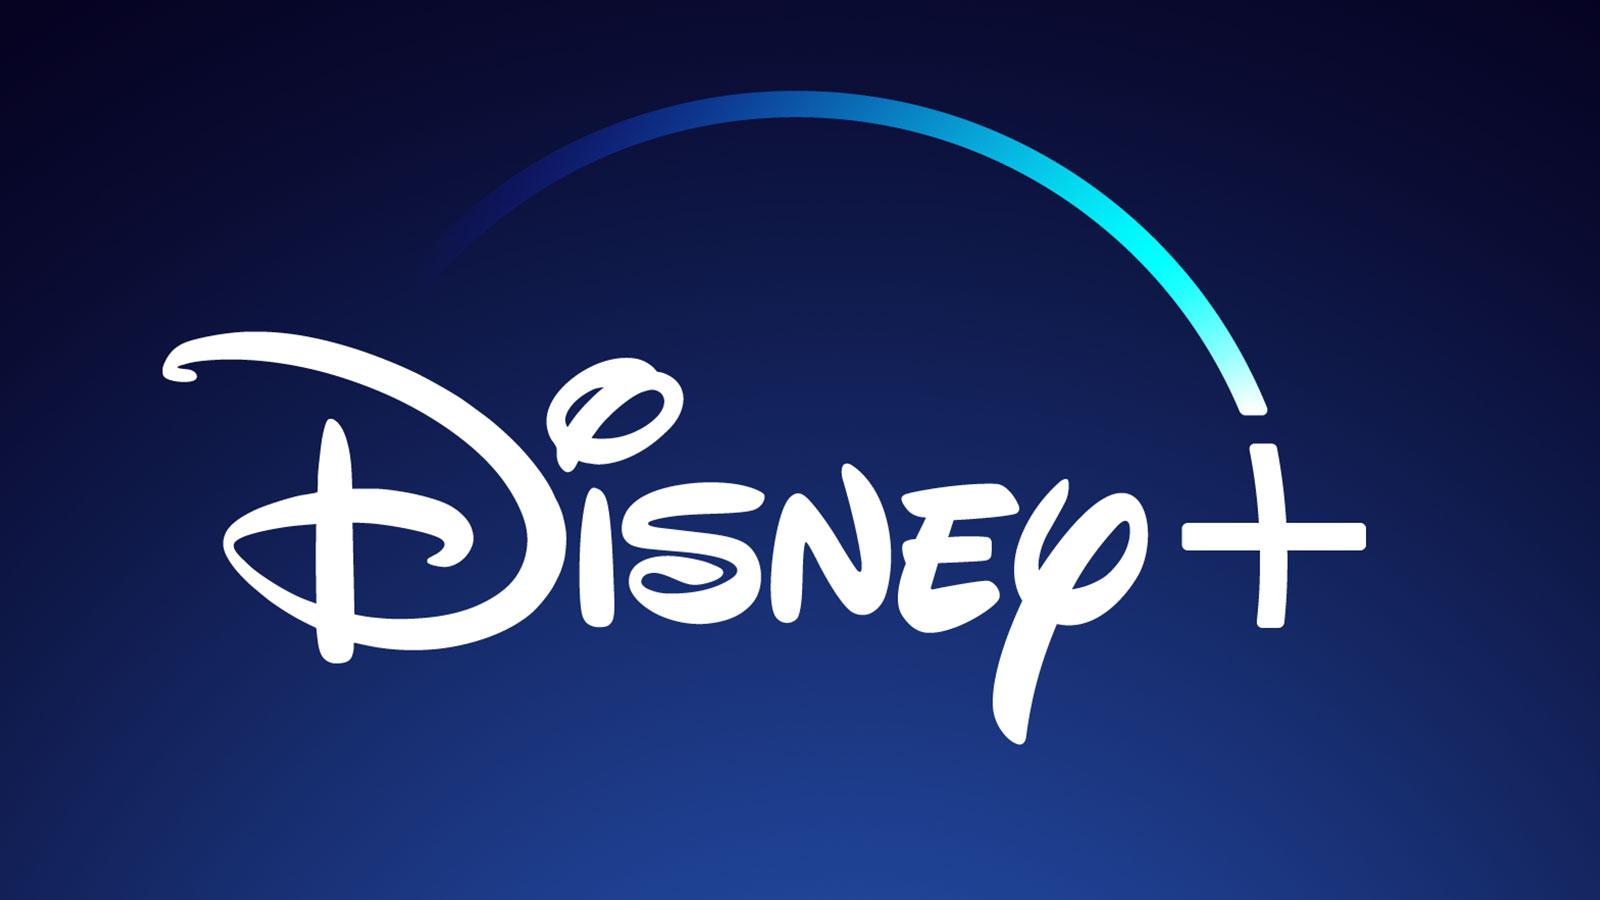 Disney+ What is new this month